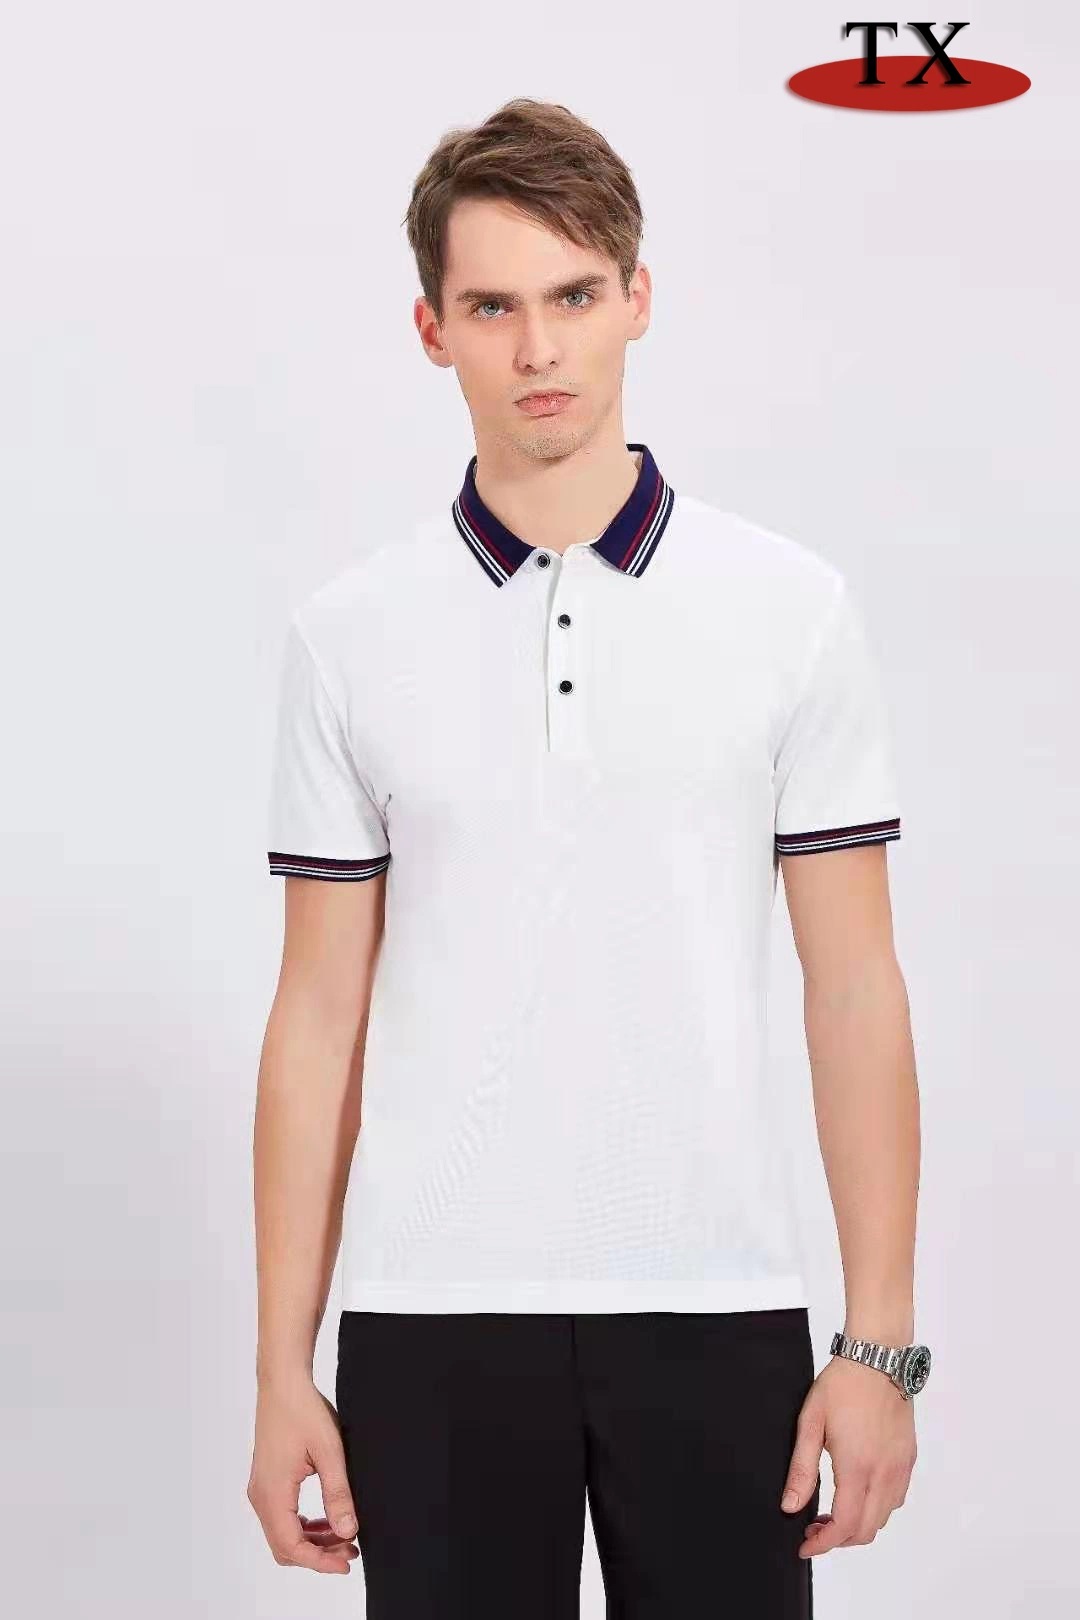 Factory Wholesale/Supplier Fashion Clothing Polyester Fabric Pure Cotton Polo Shirt